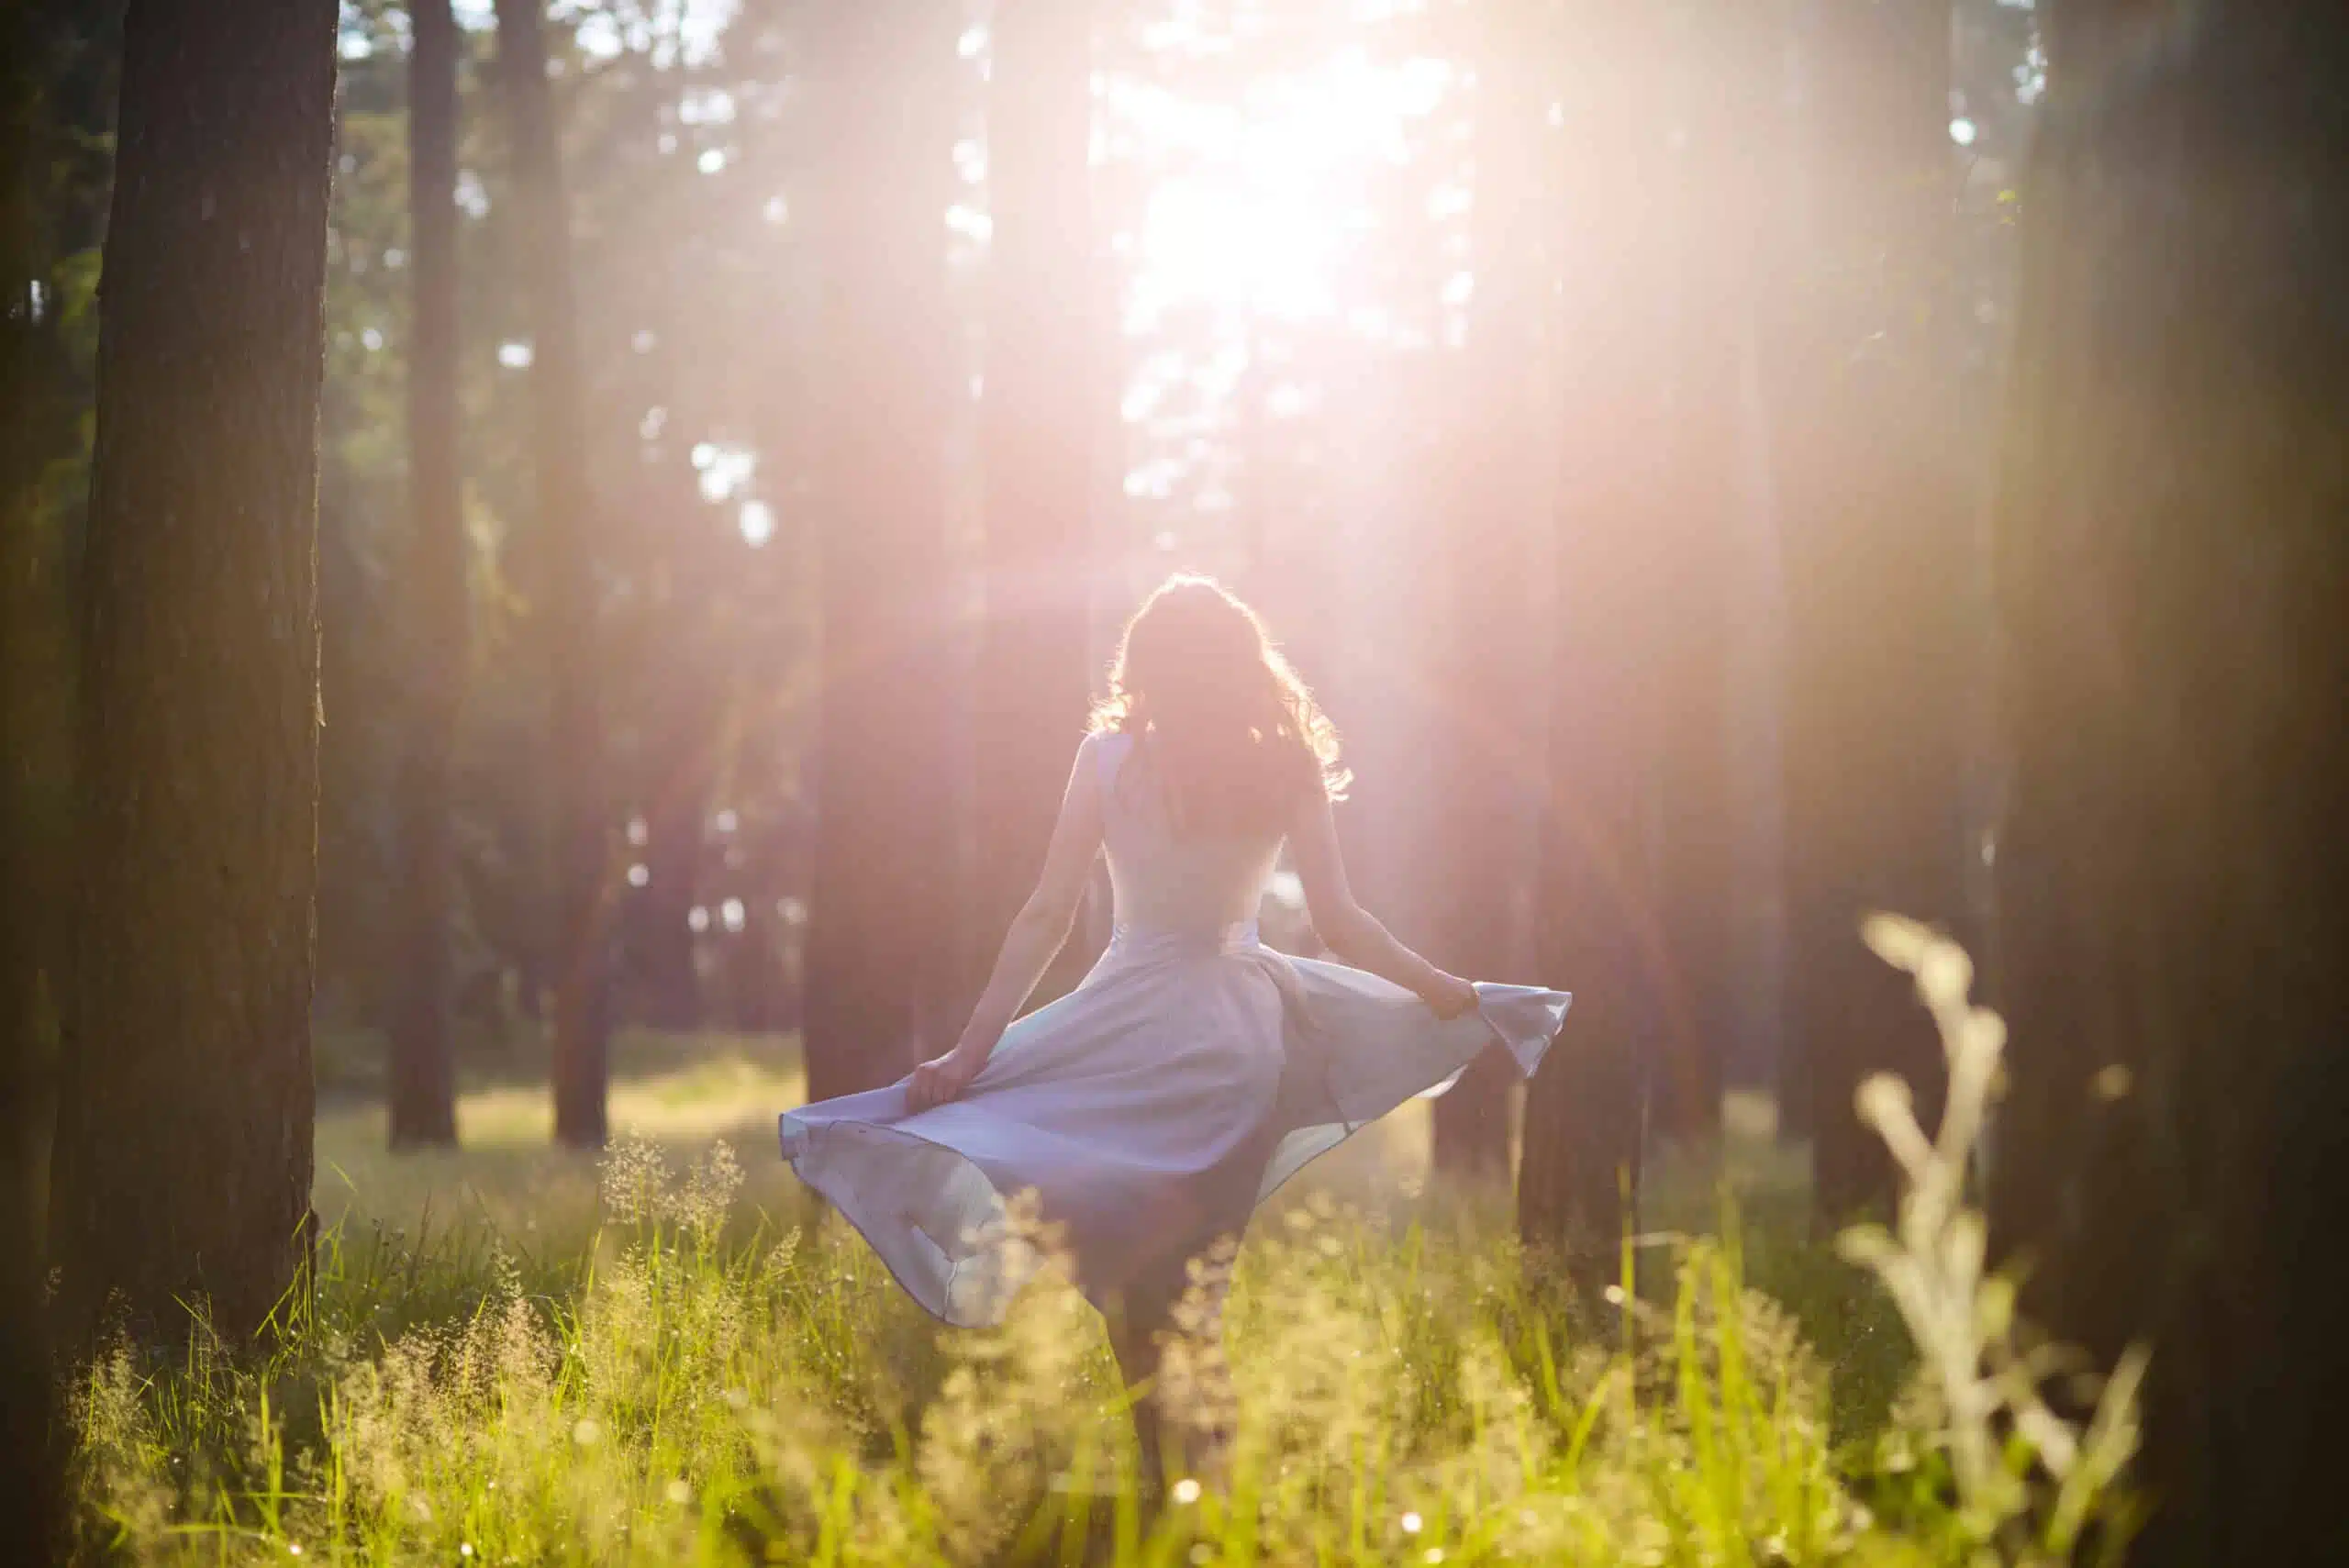 Beautiful young woman wearing elegant light blue dress standing in the forest with rays of sunlight beaming through the leaves of the trees. Soft focus and Toning